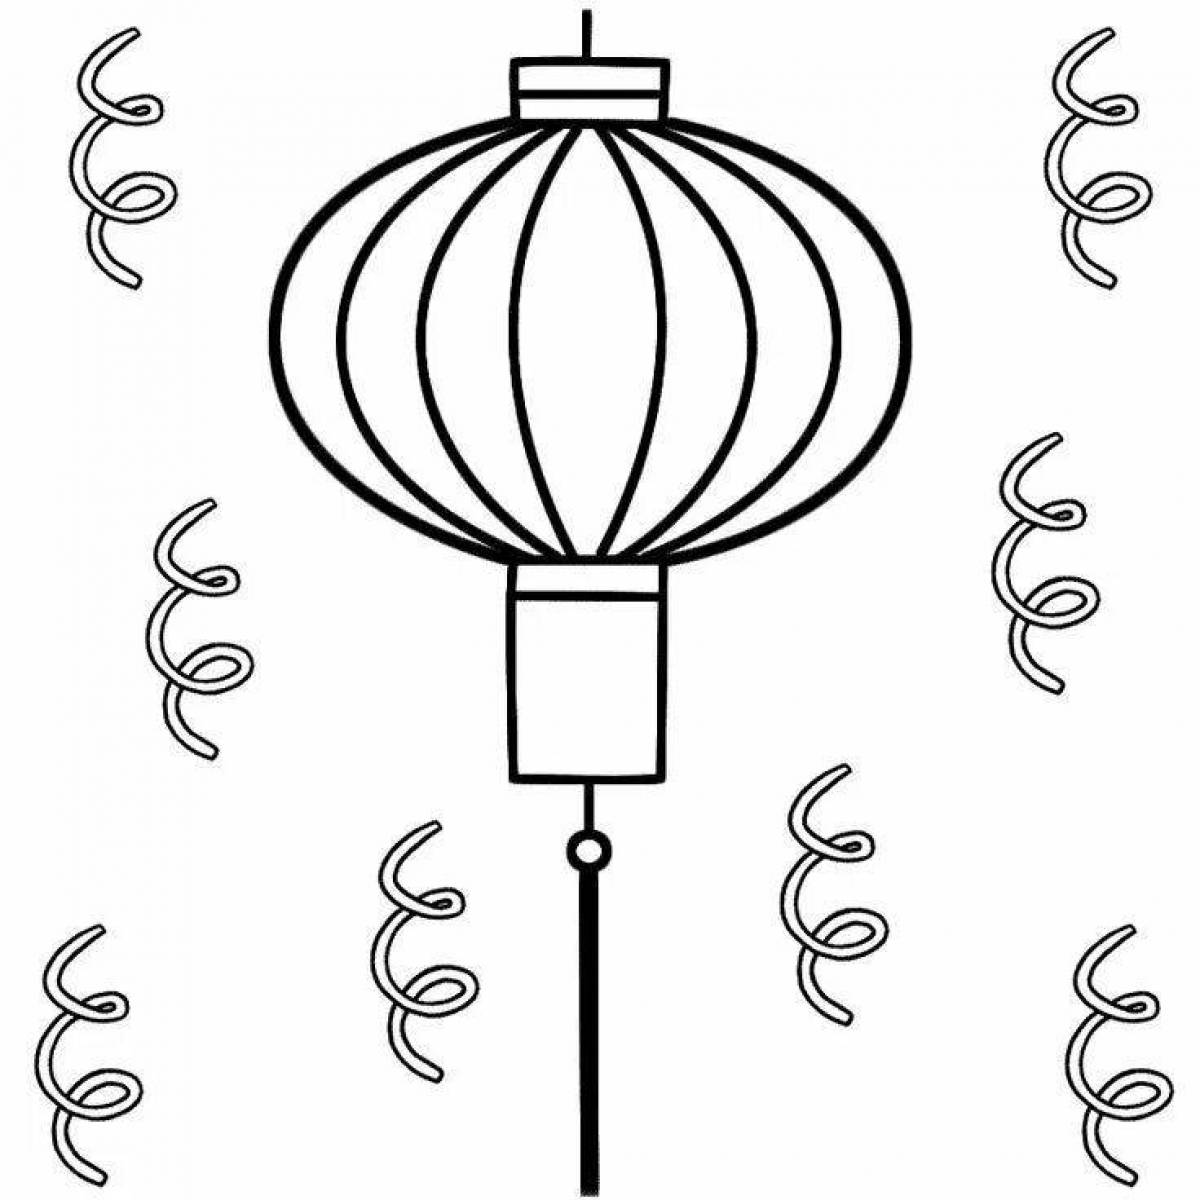 Funny Chinese lantern coloring book